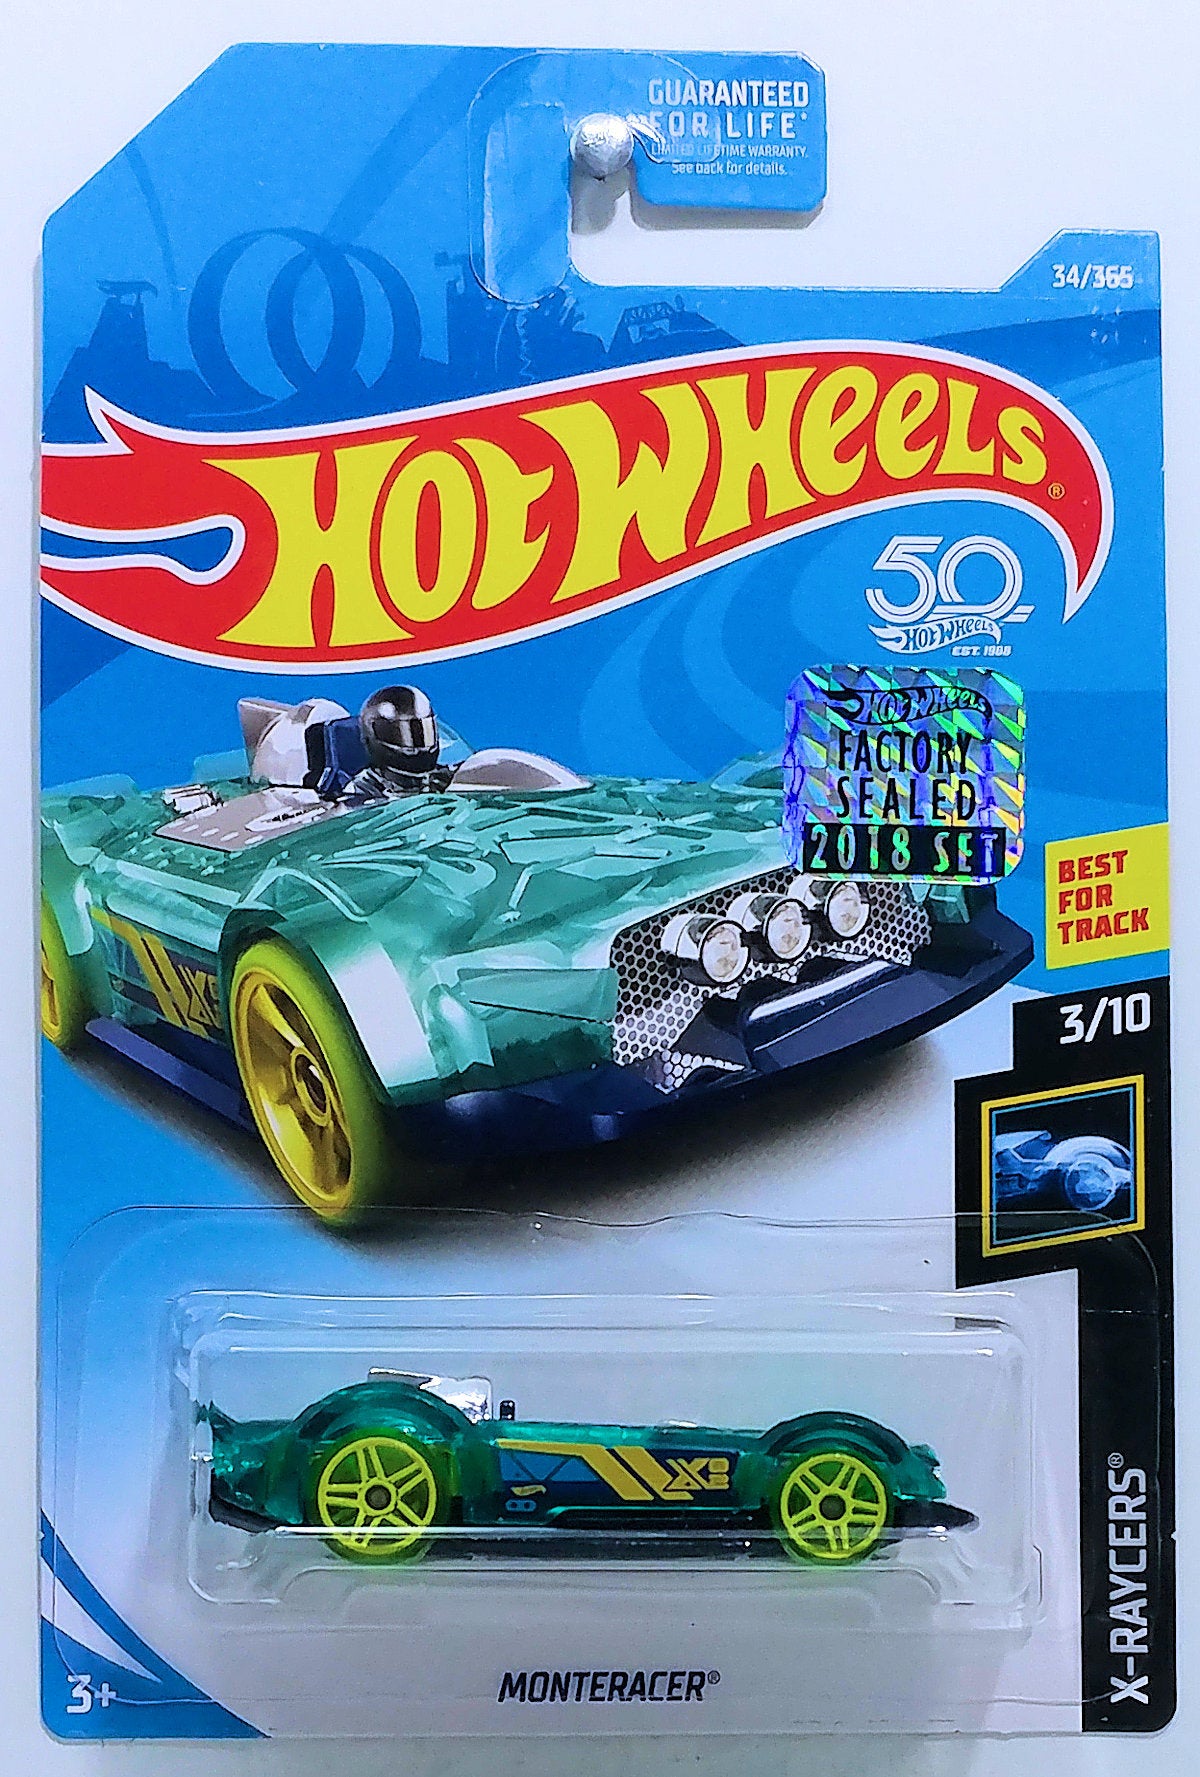 Hot Wheels 2018 - Collector # Collector # 034/365 - X-Raycers 3/10 - Monteracer - Transparent Sea Green - 50th FSC